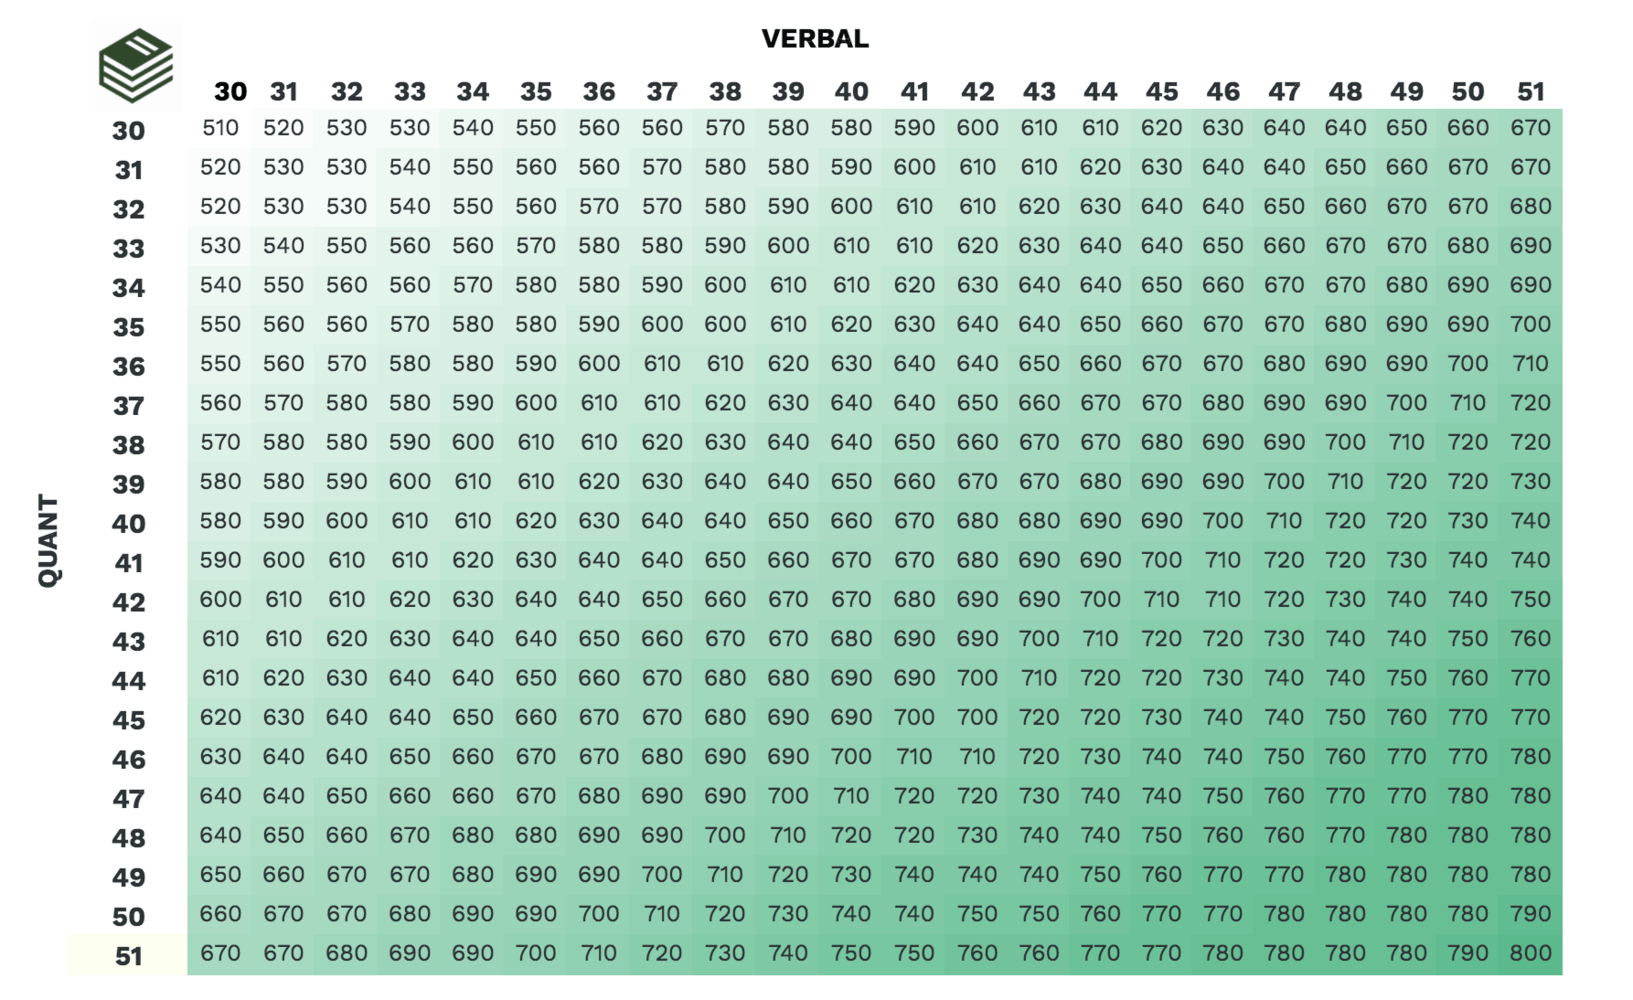 GMAT Score Chart with Verbal on top and Quant on Left.